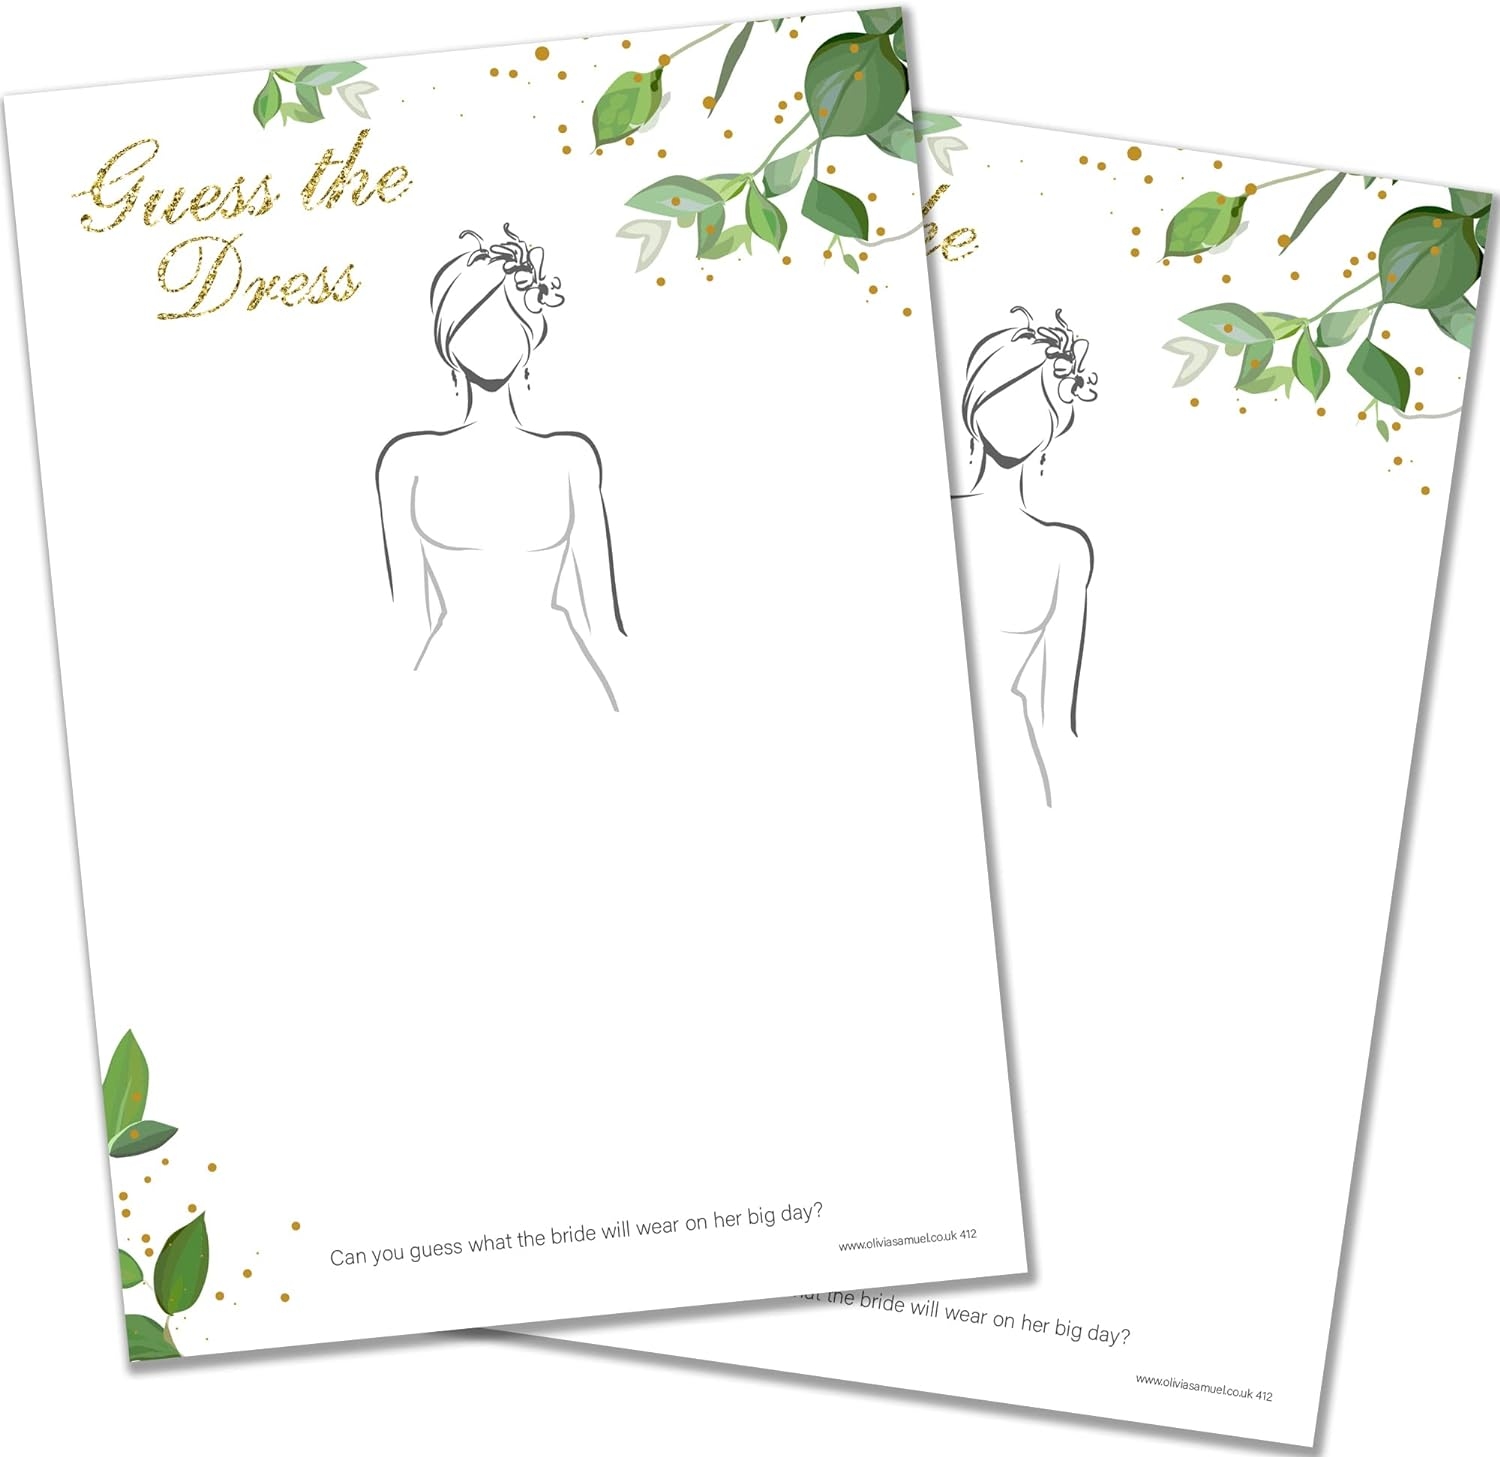 Guess The Dress 20 X Guess The Dress Bridal Shower Hen Party Game Botanicals Design